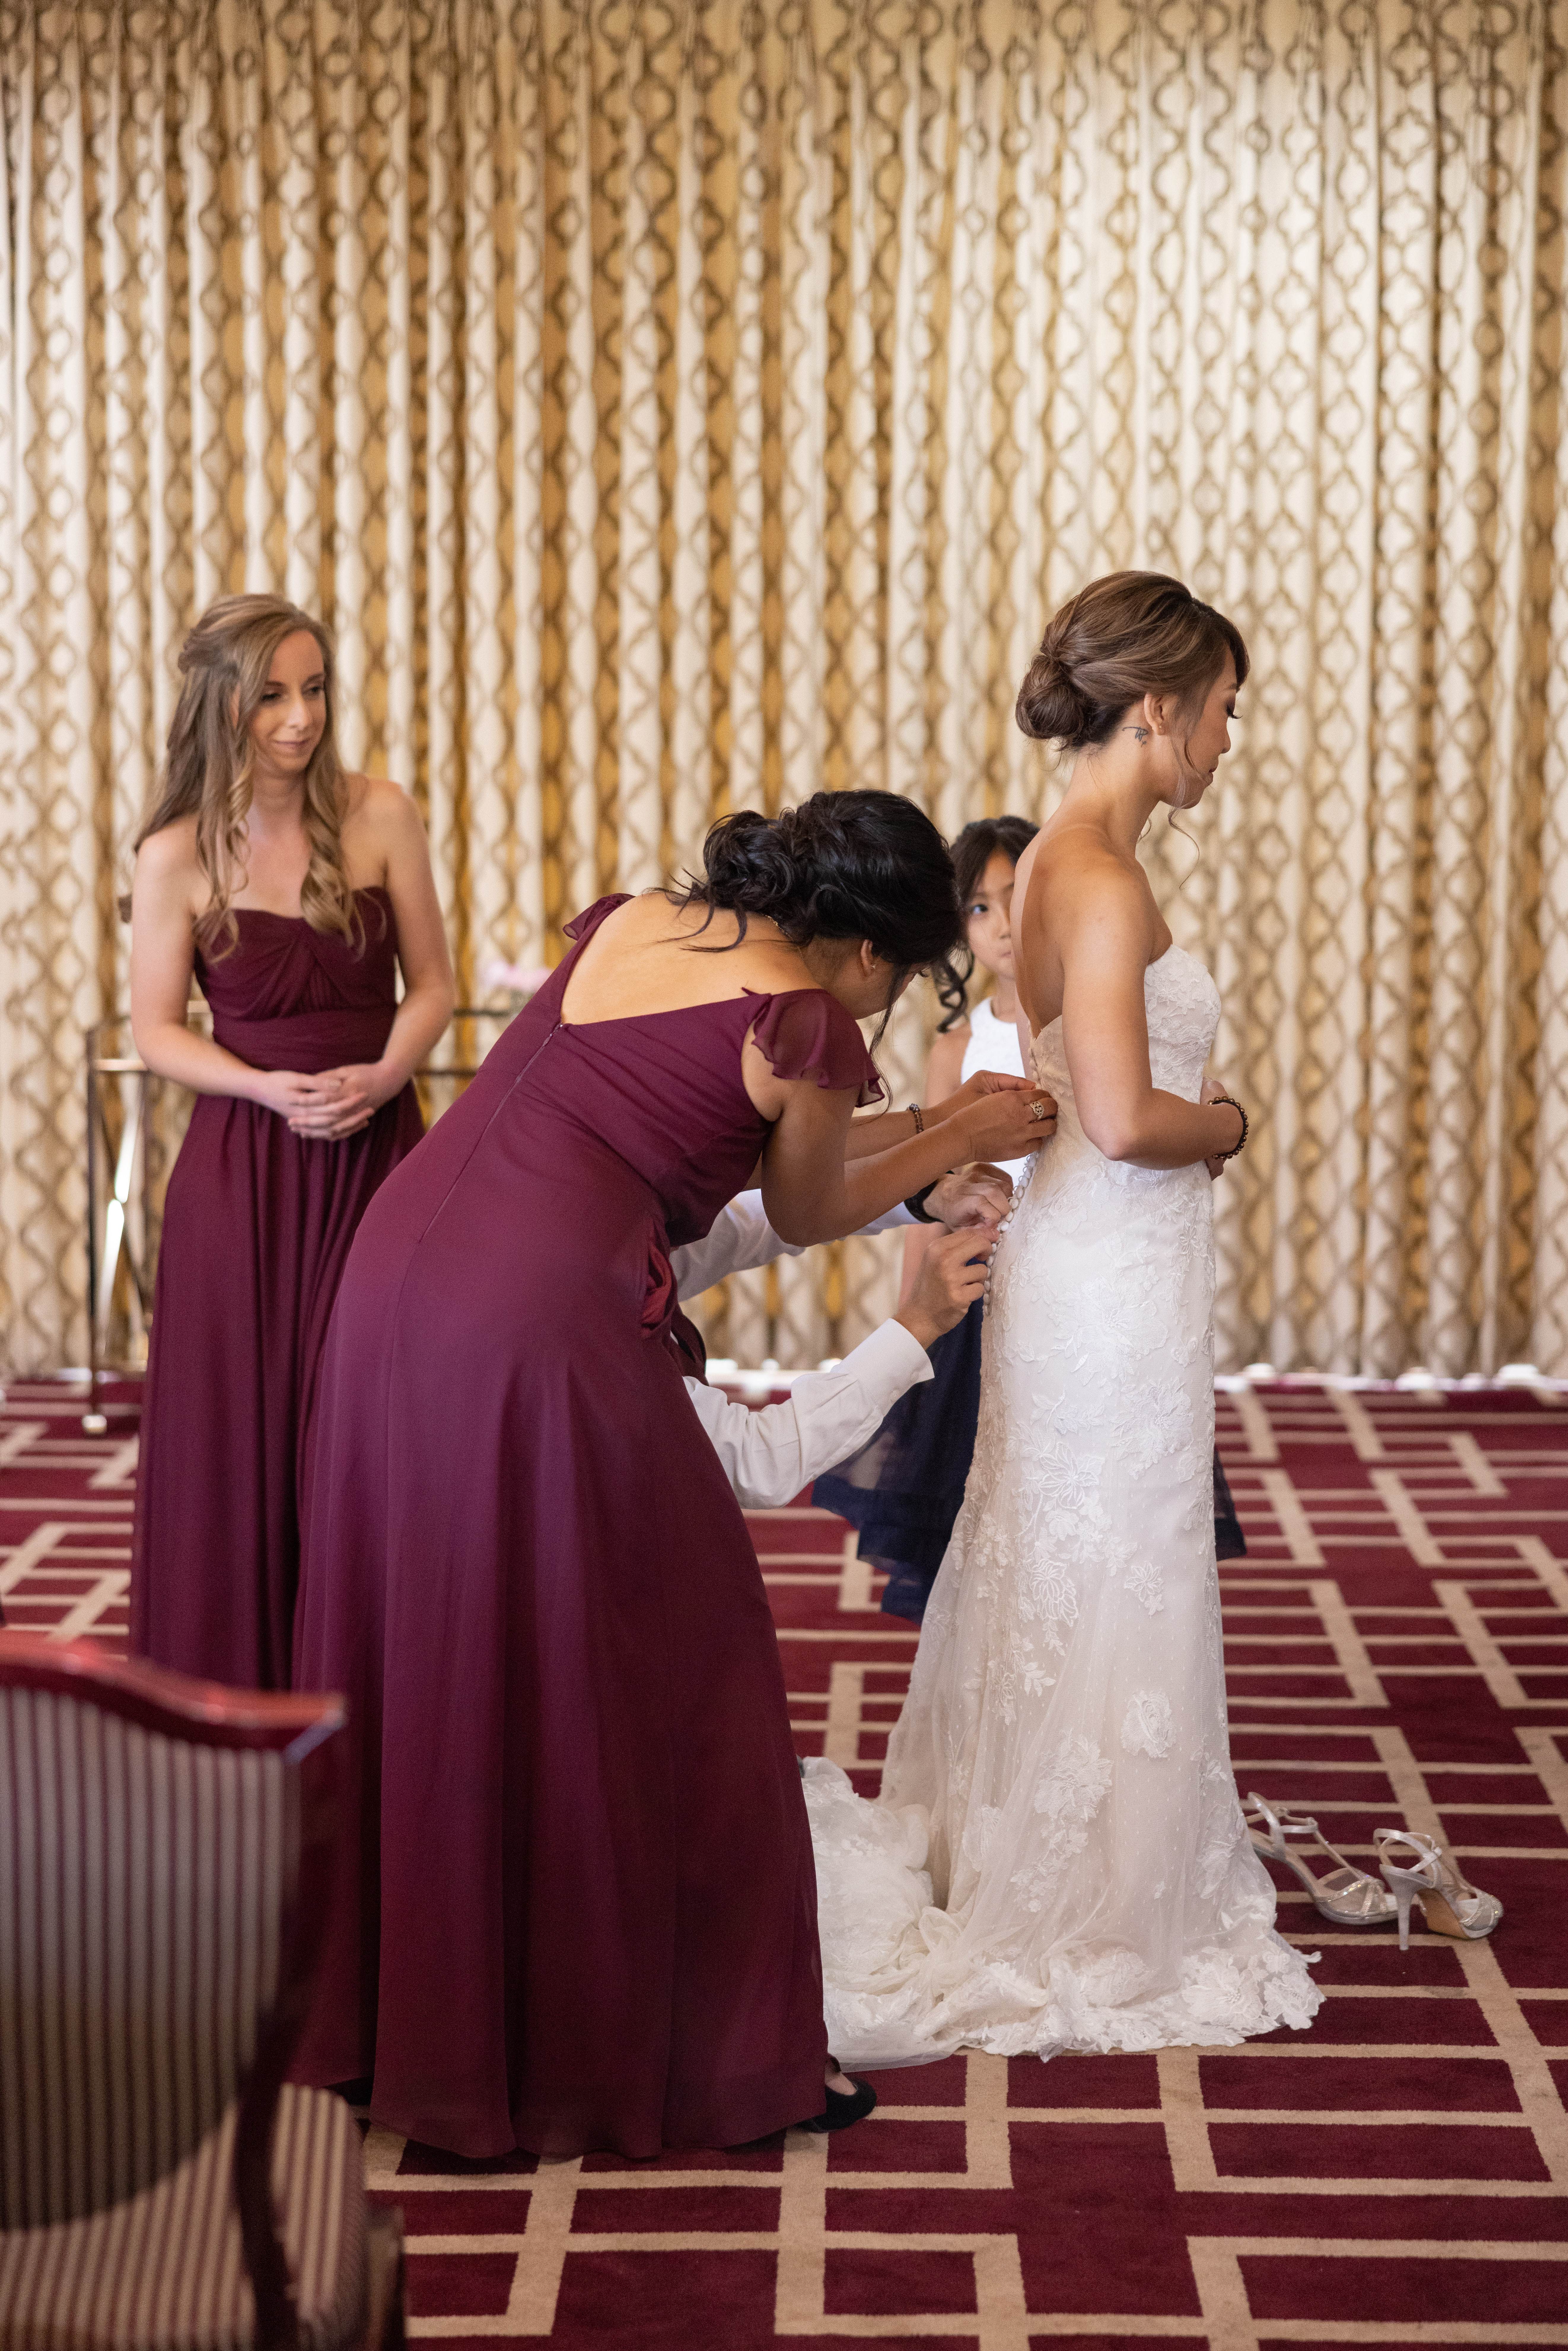 bride getting in strapless lace wedding dress with the help of her bridesmaids in jewel toned maroon dresses